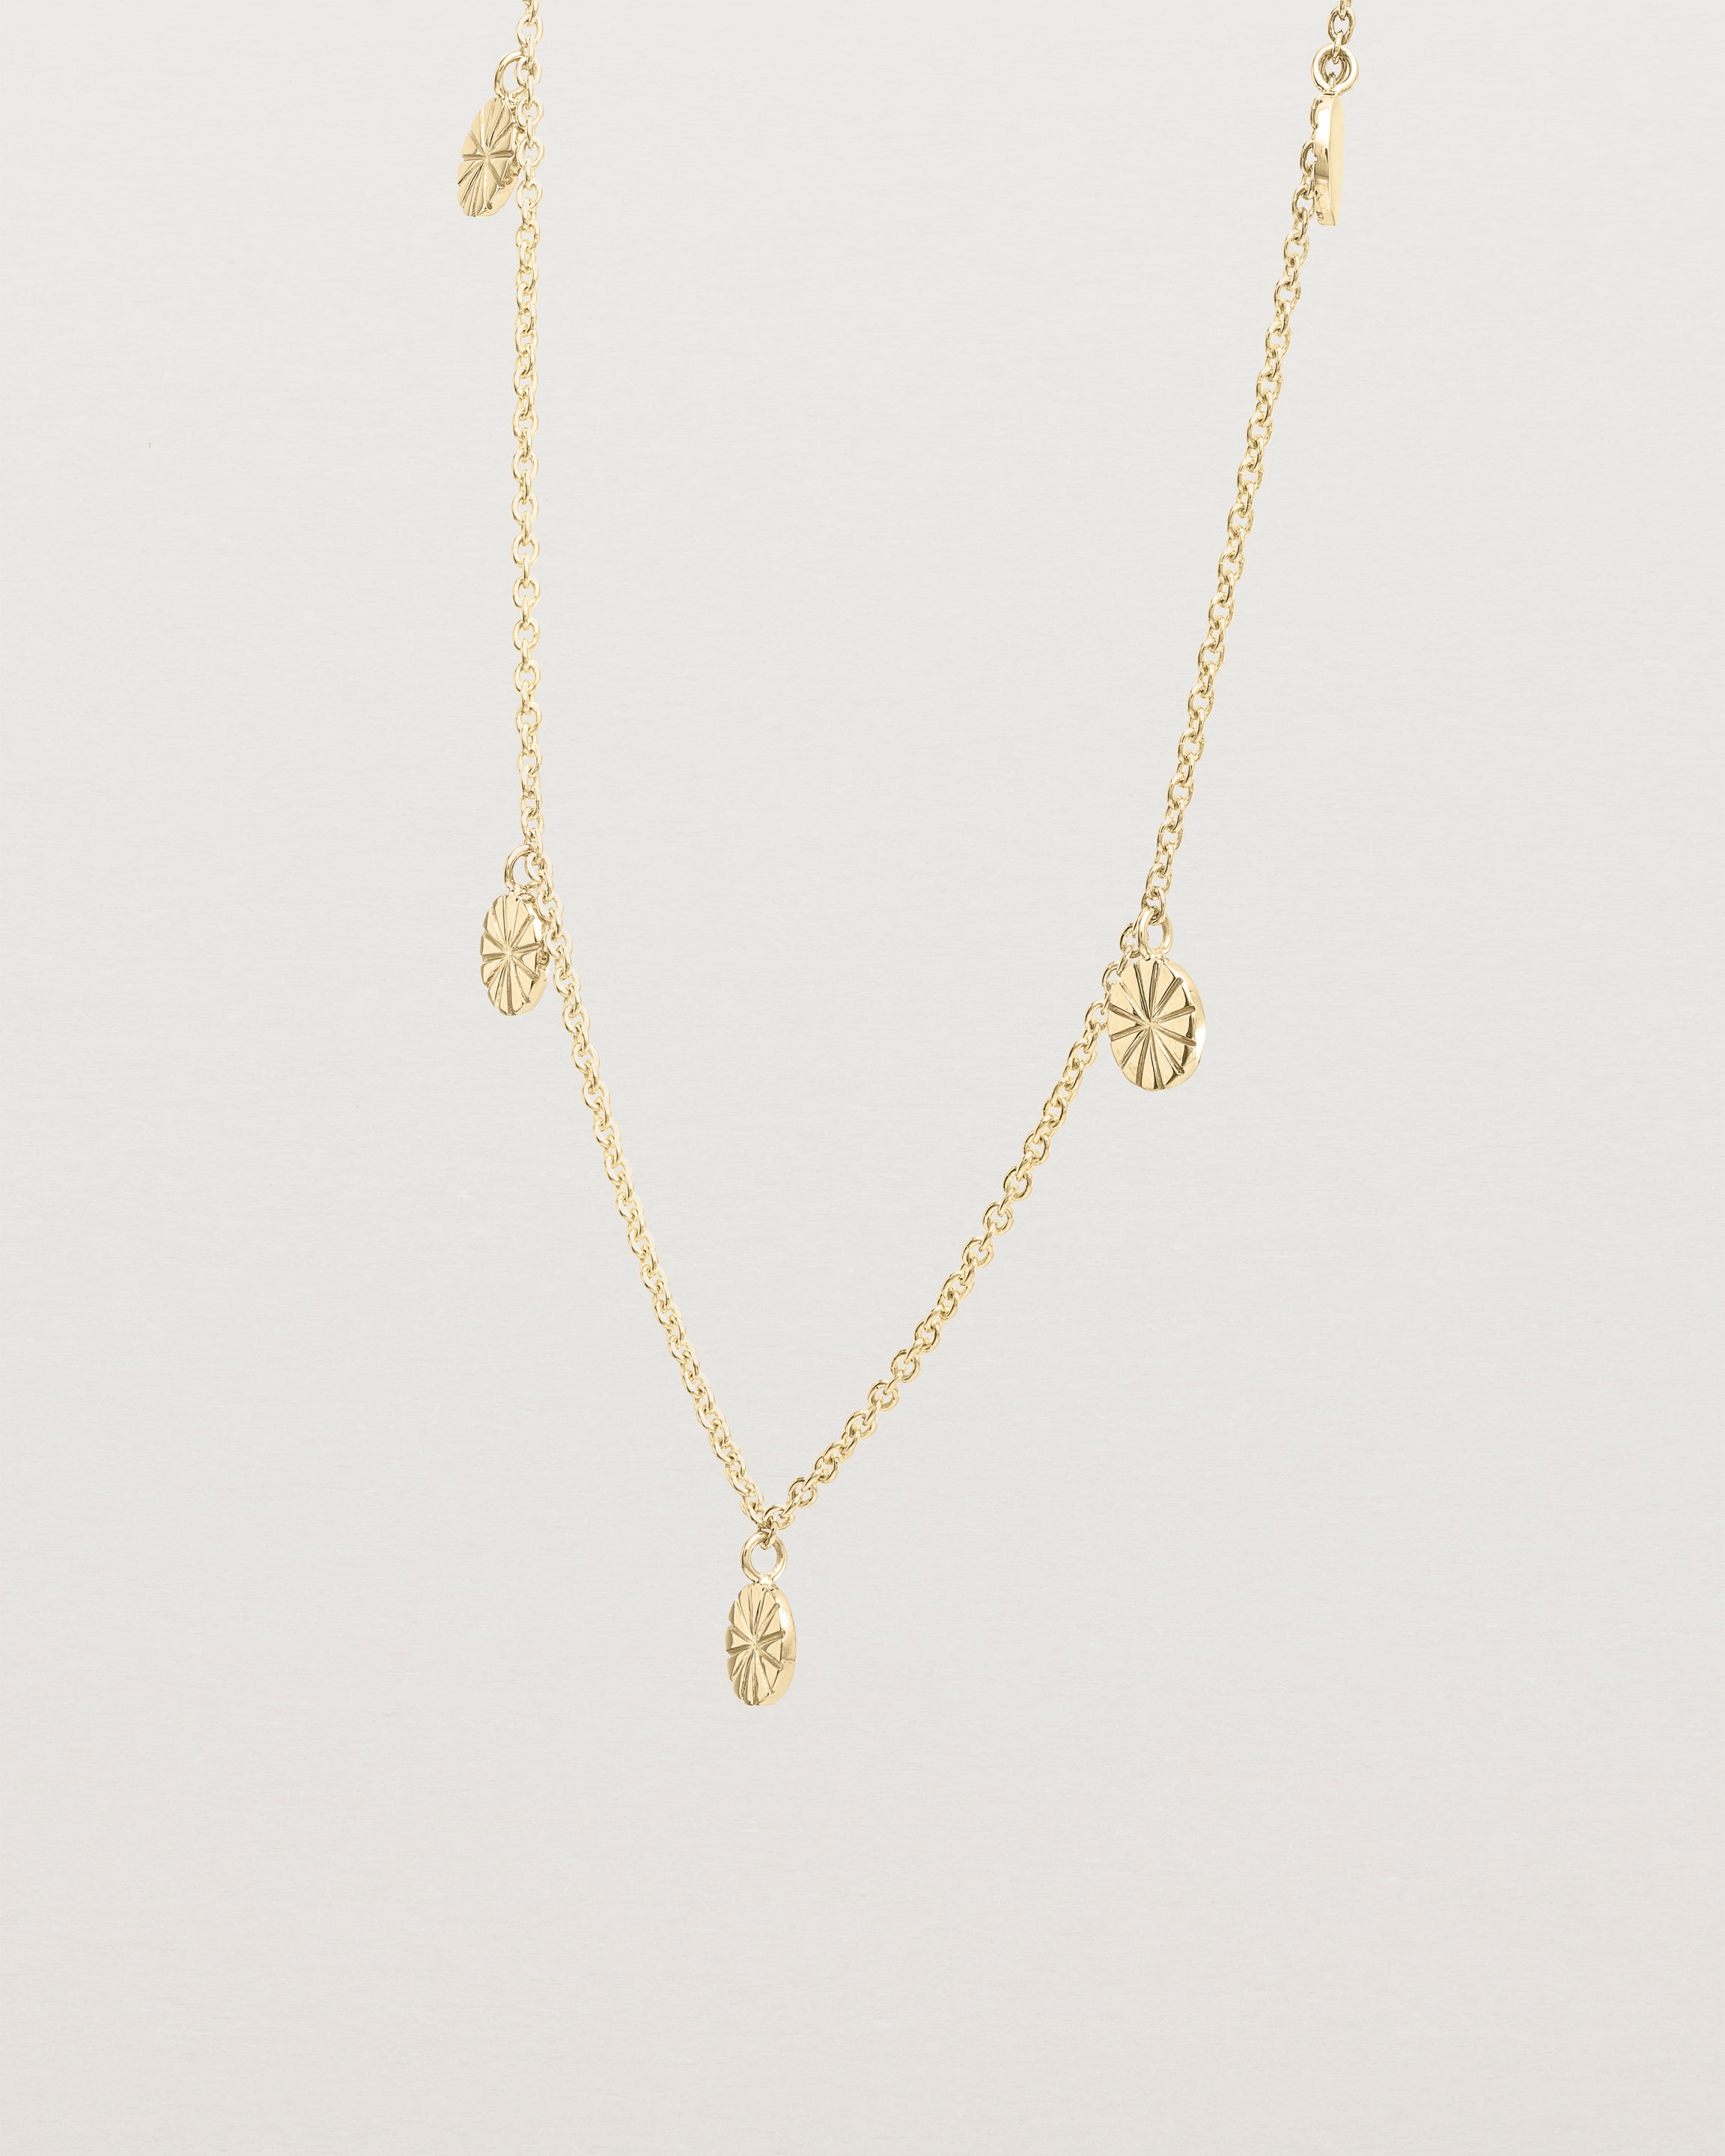 Angled view of the Jia Charm Necklace | Yellow Gold.